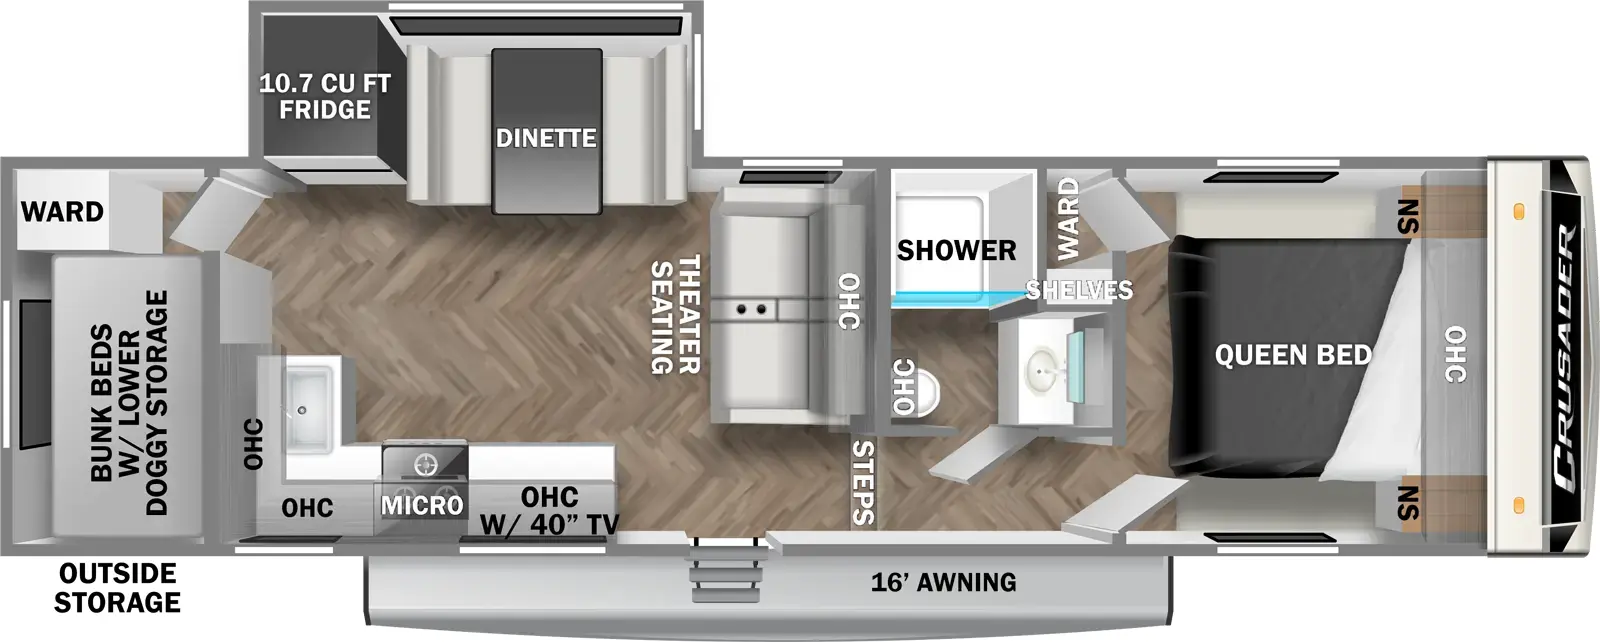 The 270BHX has one slideout and one entry. Exterior features outside storage and awning. Interior layout front to back: foot-facing queen bed with overhead cabinet and nightstands on each side, and off-door side wardrobe with shelves along inner wall; off-door side full bathroom; door side steps down to main living area and entry; theater seating with overhead cabinet along inner wall; off-door side slideout with dinette and refrigerator; door side kitchen counter with overhead cabinet, TV, microwave, and cooktop wraps to inner wall with sink; rear bunk area with wardrobe and bunk beds with lower doggy storage.